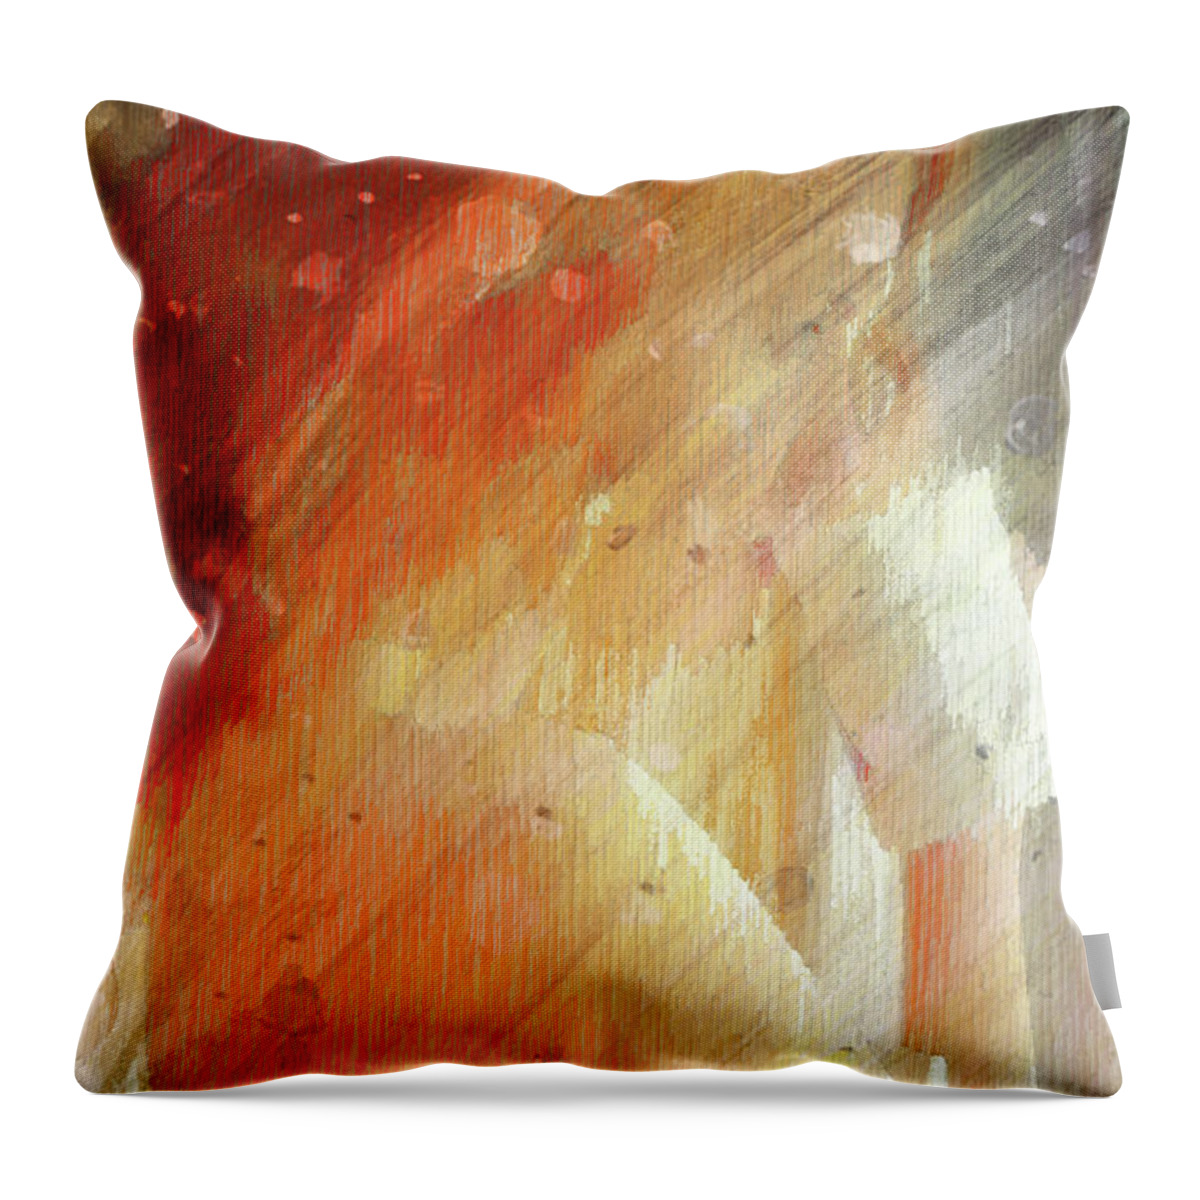 Red Throw Pillow featuring the digital art Red Head Drinking Coffee by Andrea Barbieri